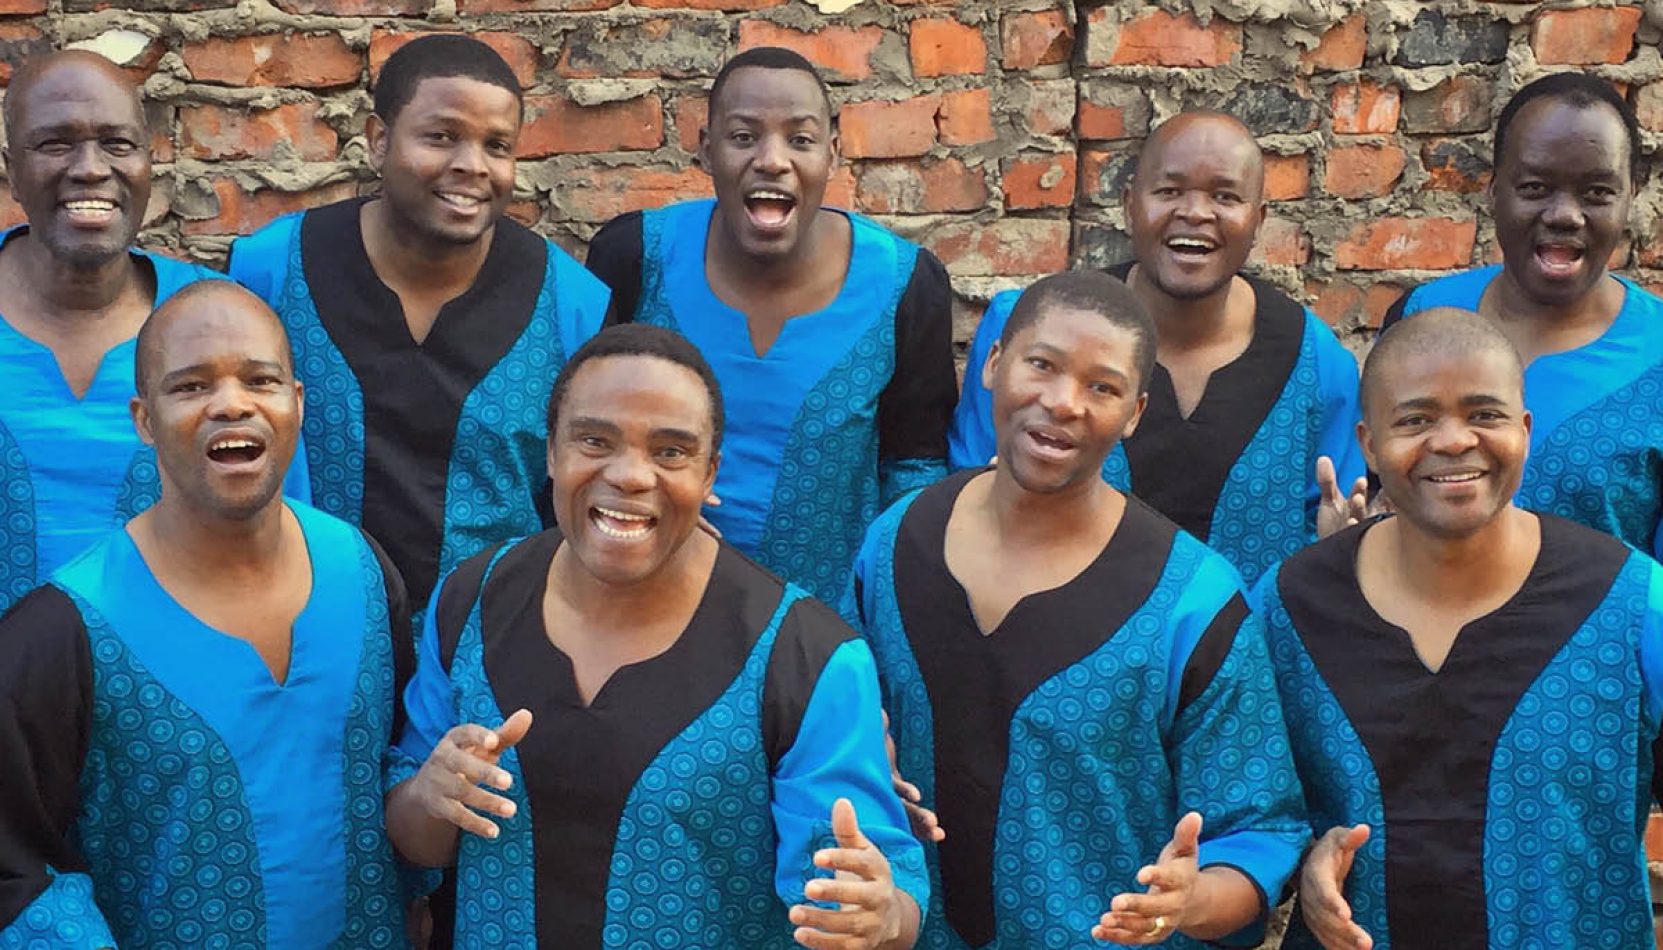 Ladysmith black mambazo, whats on this week, surrey, guide to, guide to surrey, whats on, whats on in surrey, music, theatre, family, food and drink, sports, events,. gigs, comedy, drama, things to do, going out in surrey